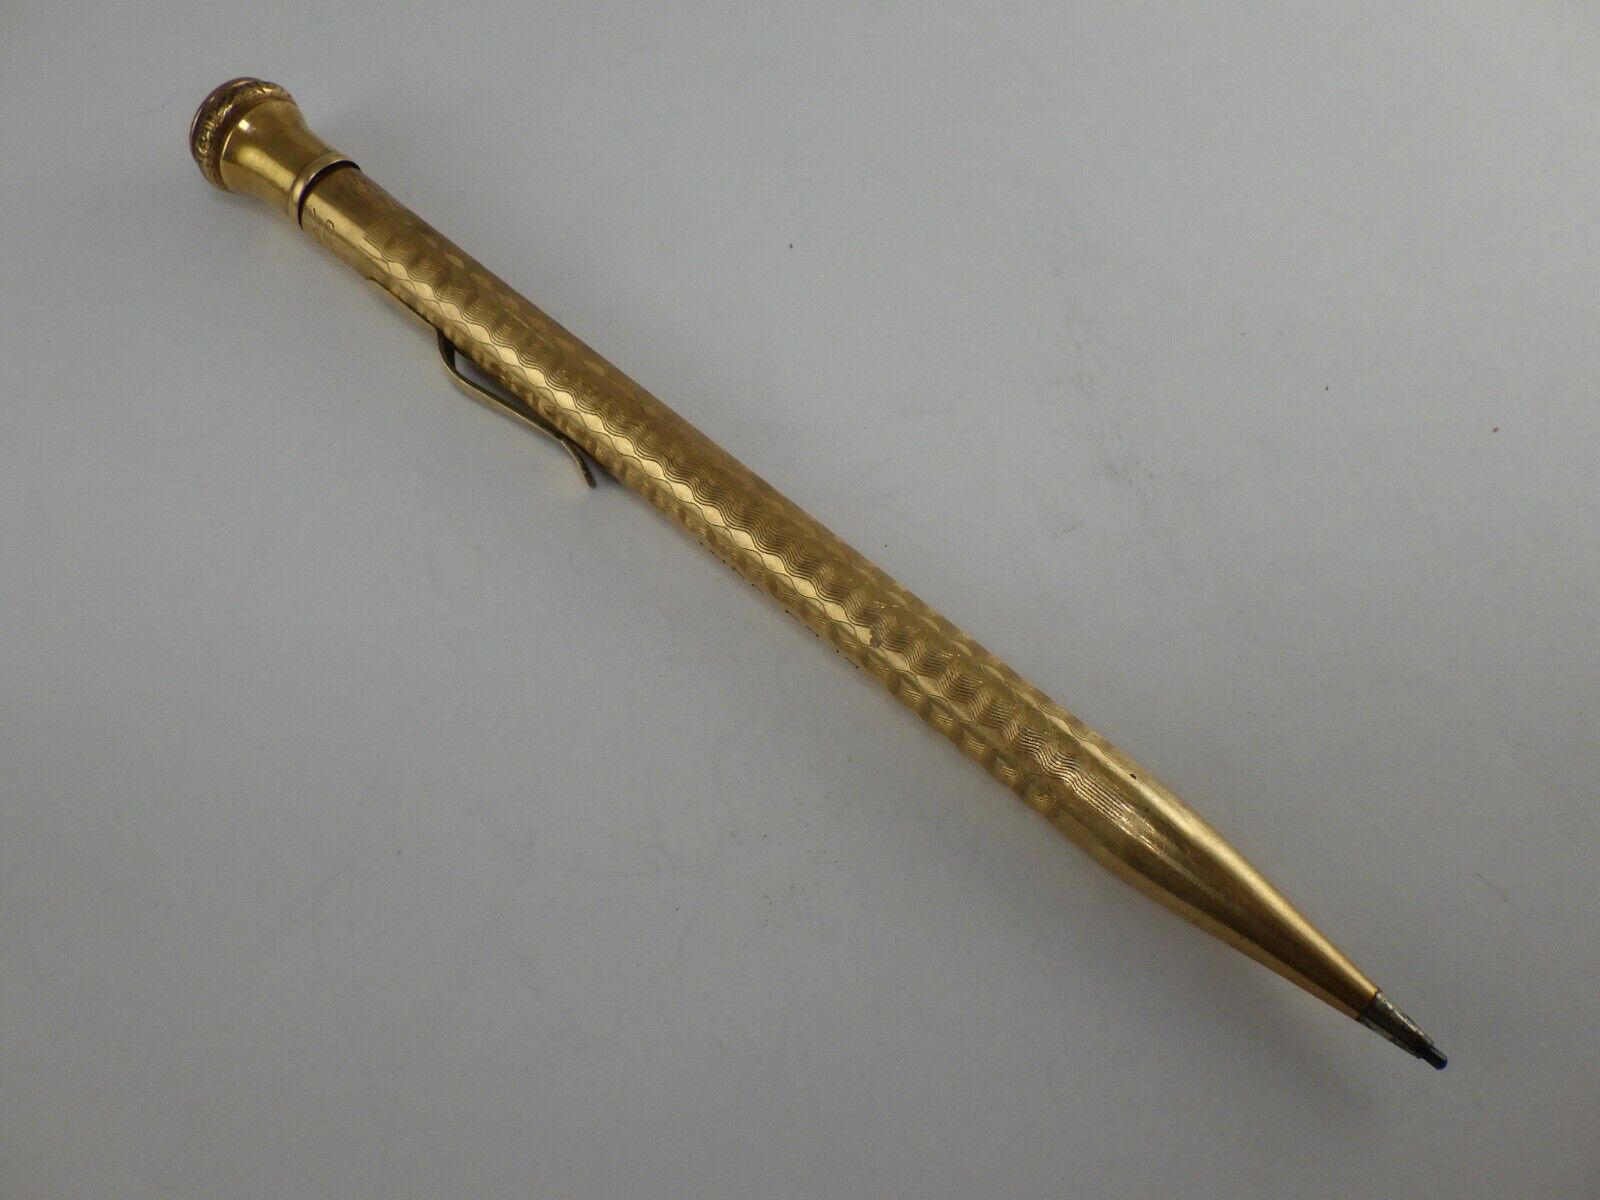 Antique Valuations: Wahl Eversharp Mechanical Pencil - Gold Filled